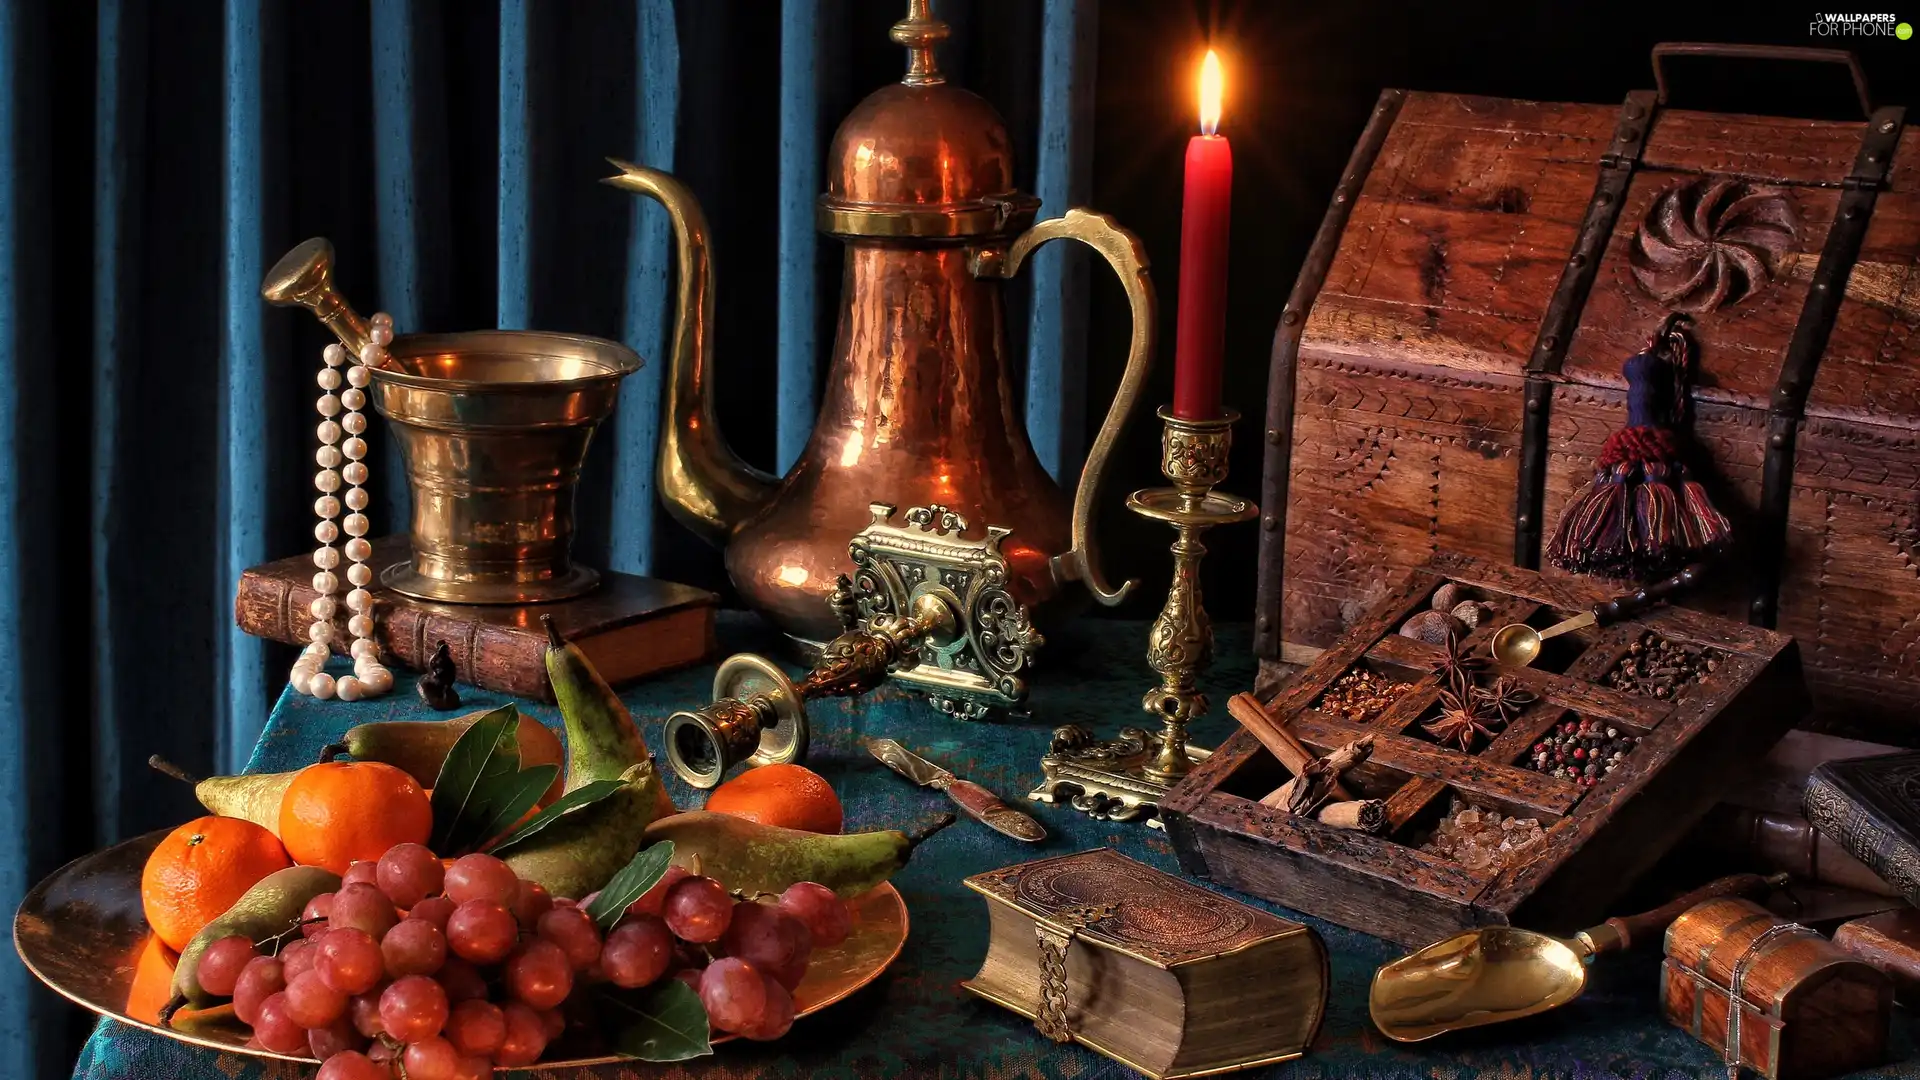 Pearl, composition, candle, jug, box, spice, candlestick, mortar, Fruits, Books, casket